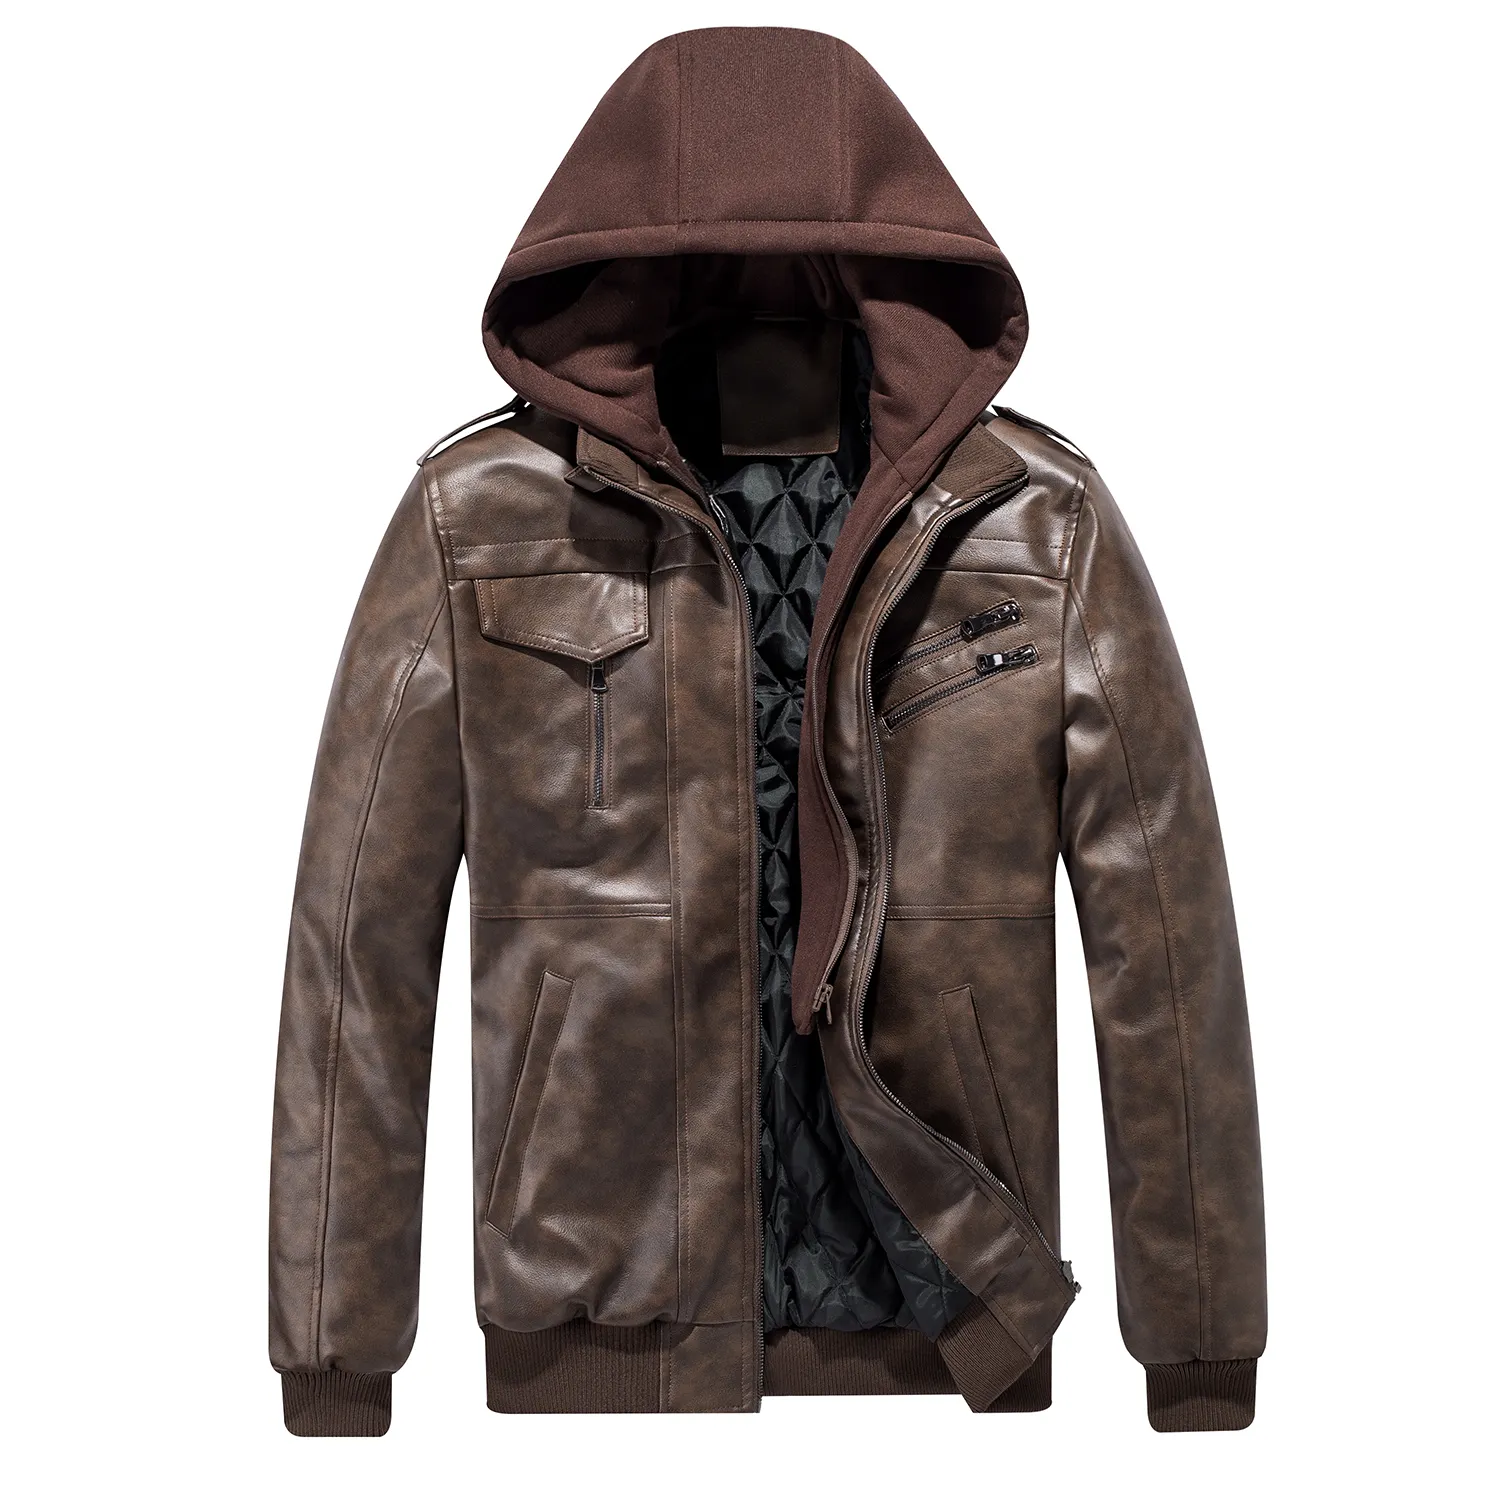 High Quality PU Leather Detachable Knitted Hat Outdoor Lather Jacket Mens with Warm Pockets